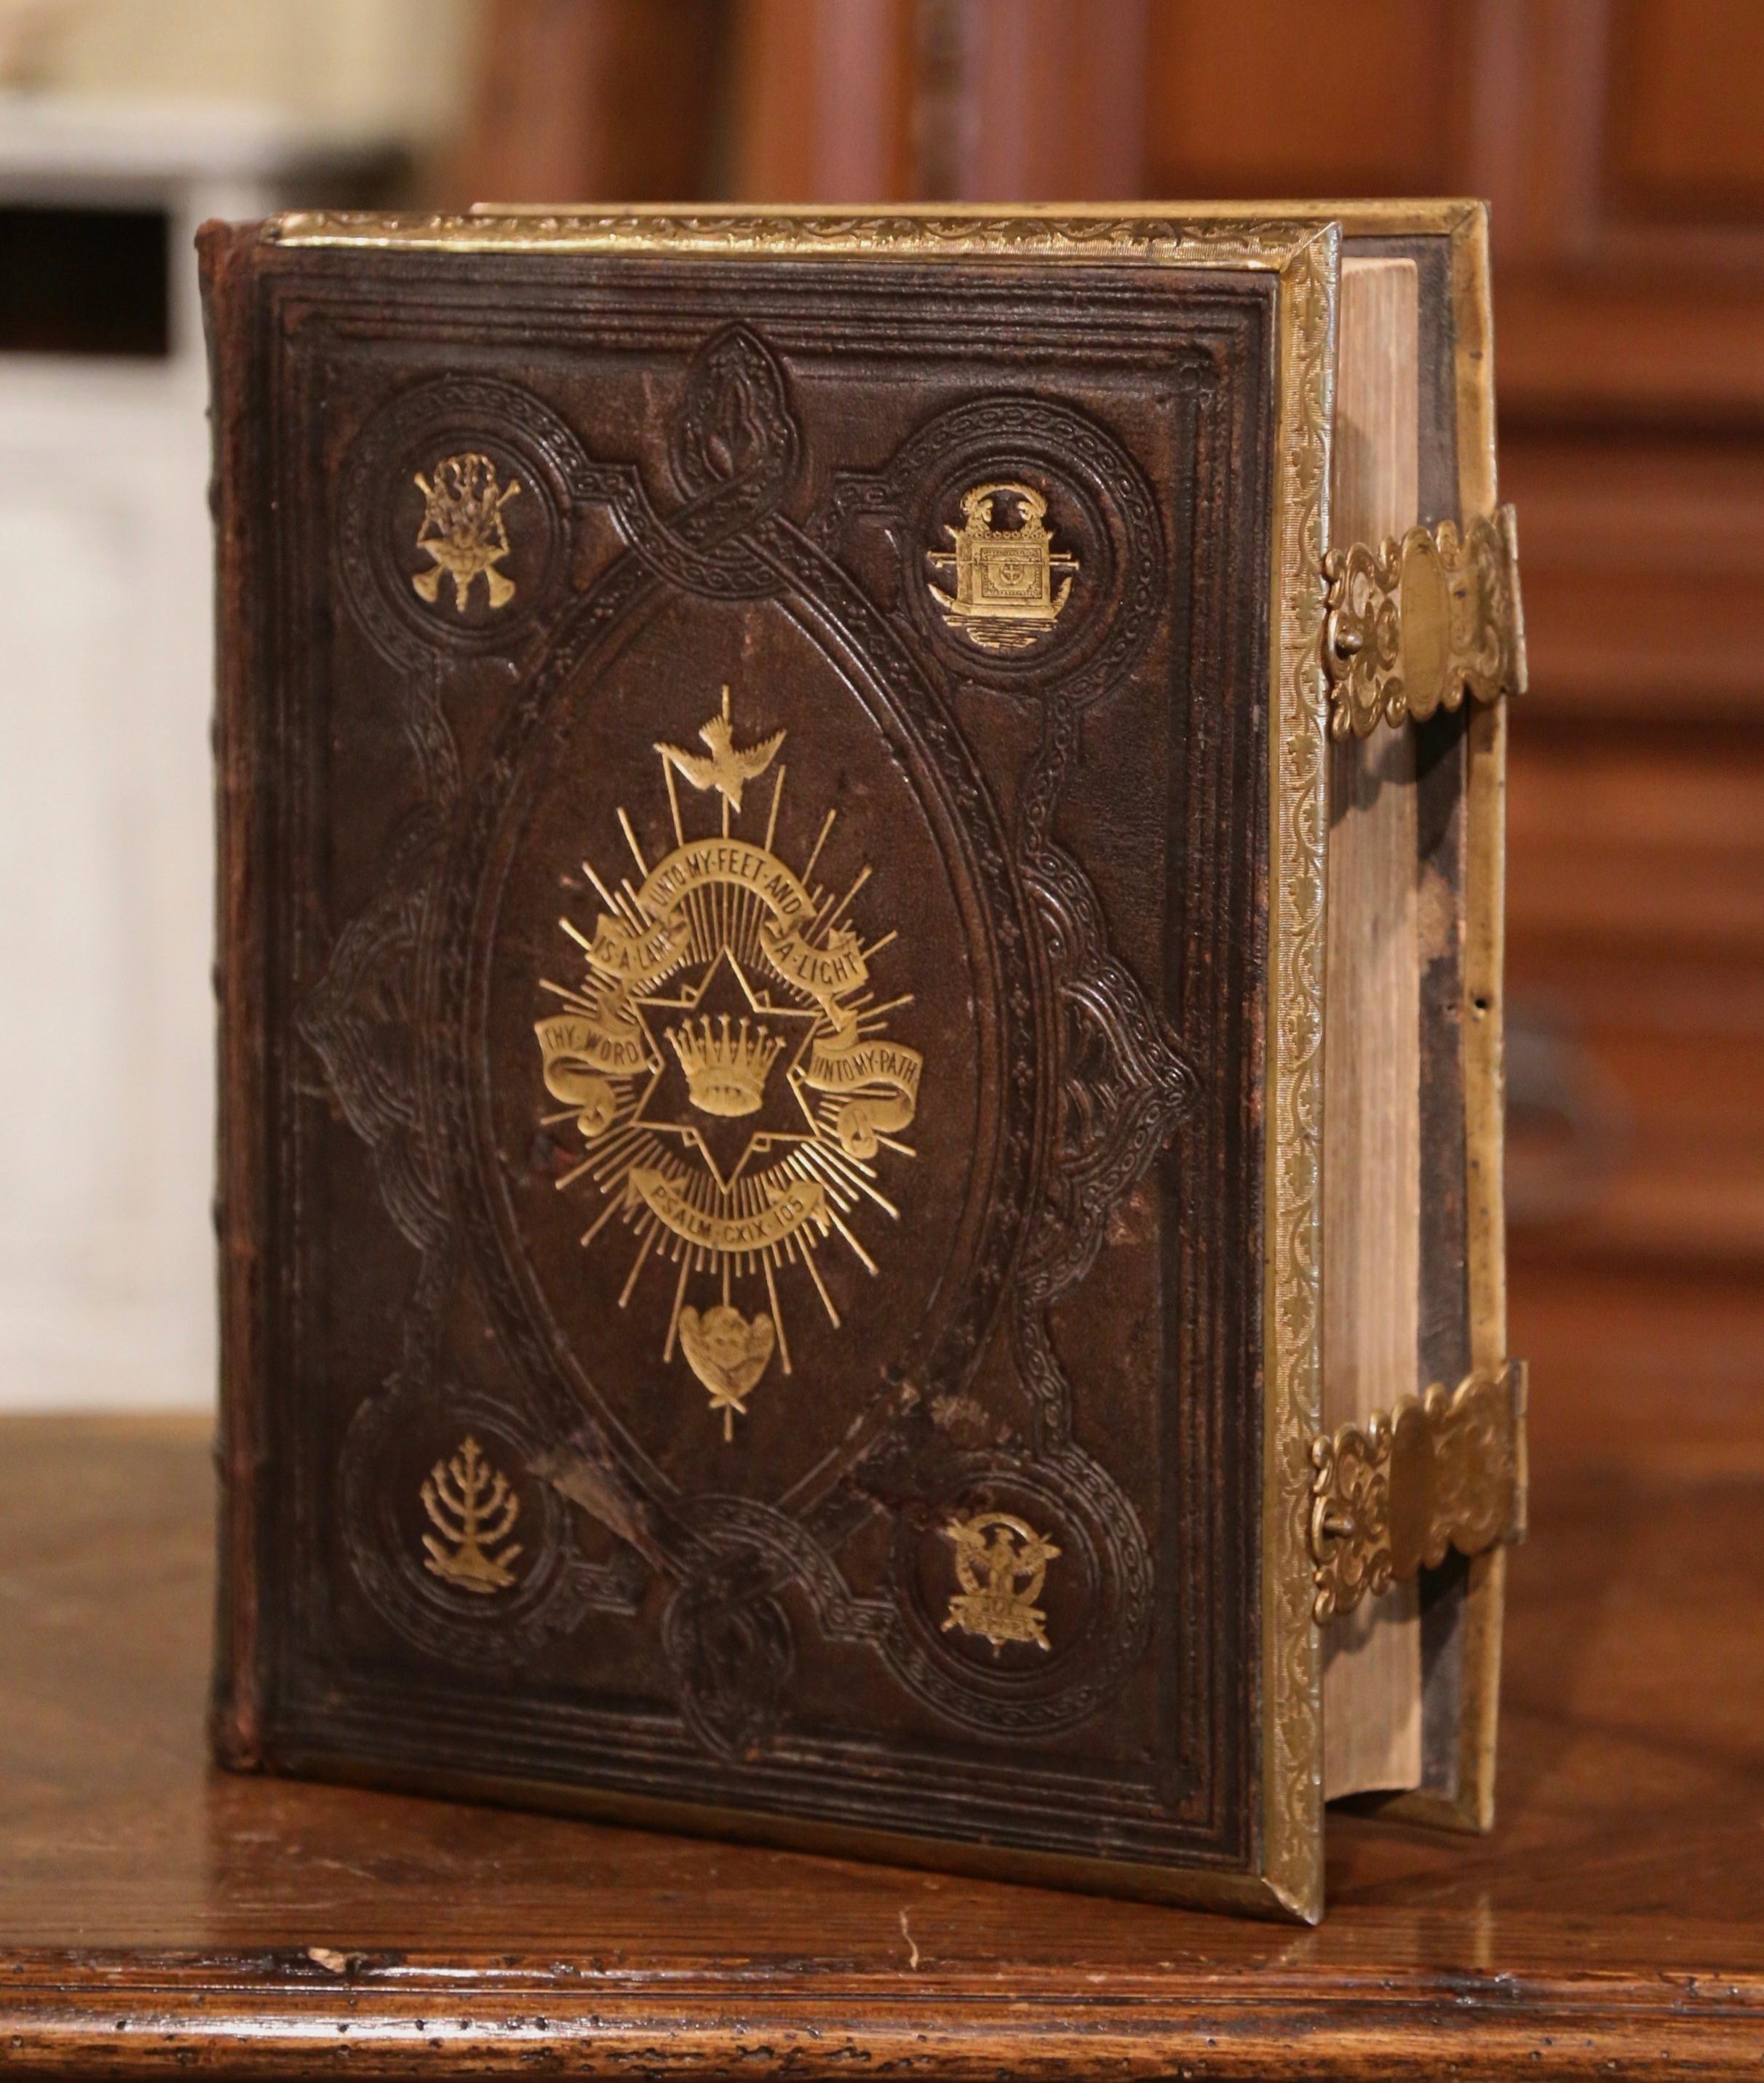 Antique Holy Bible - 6 For Sale on 1stDibs